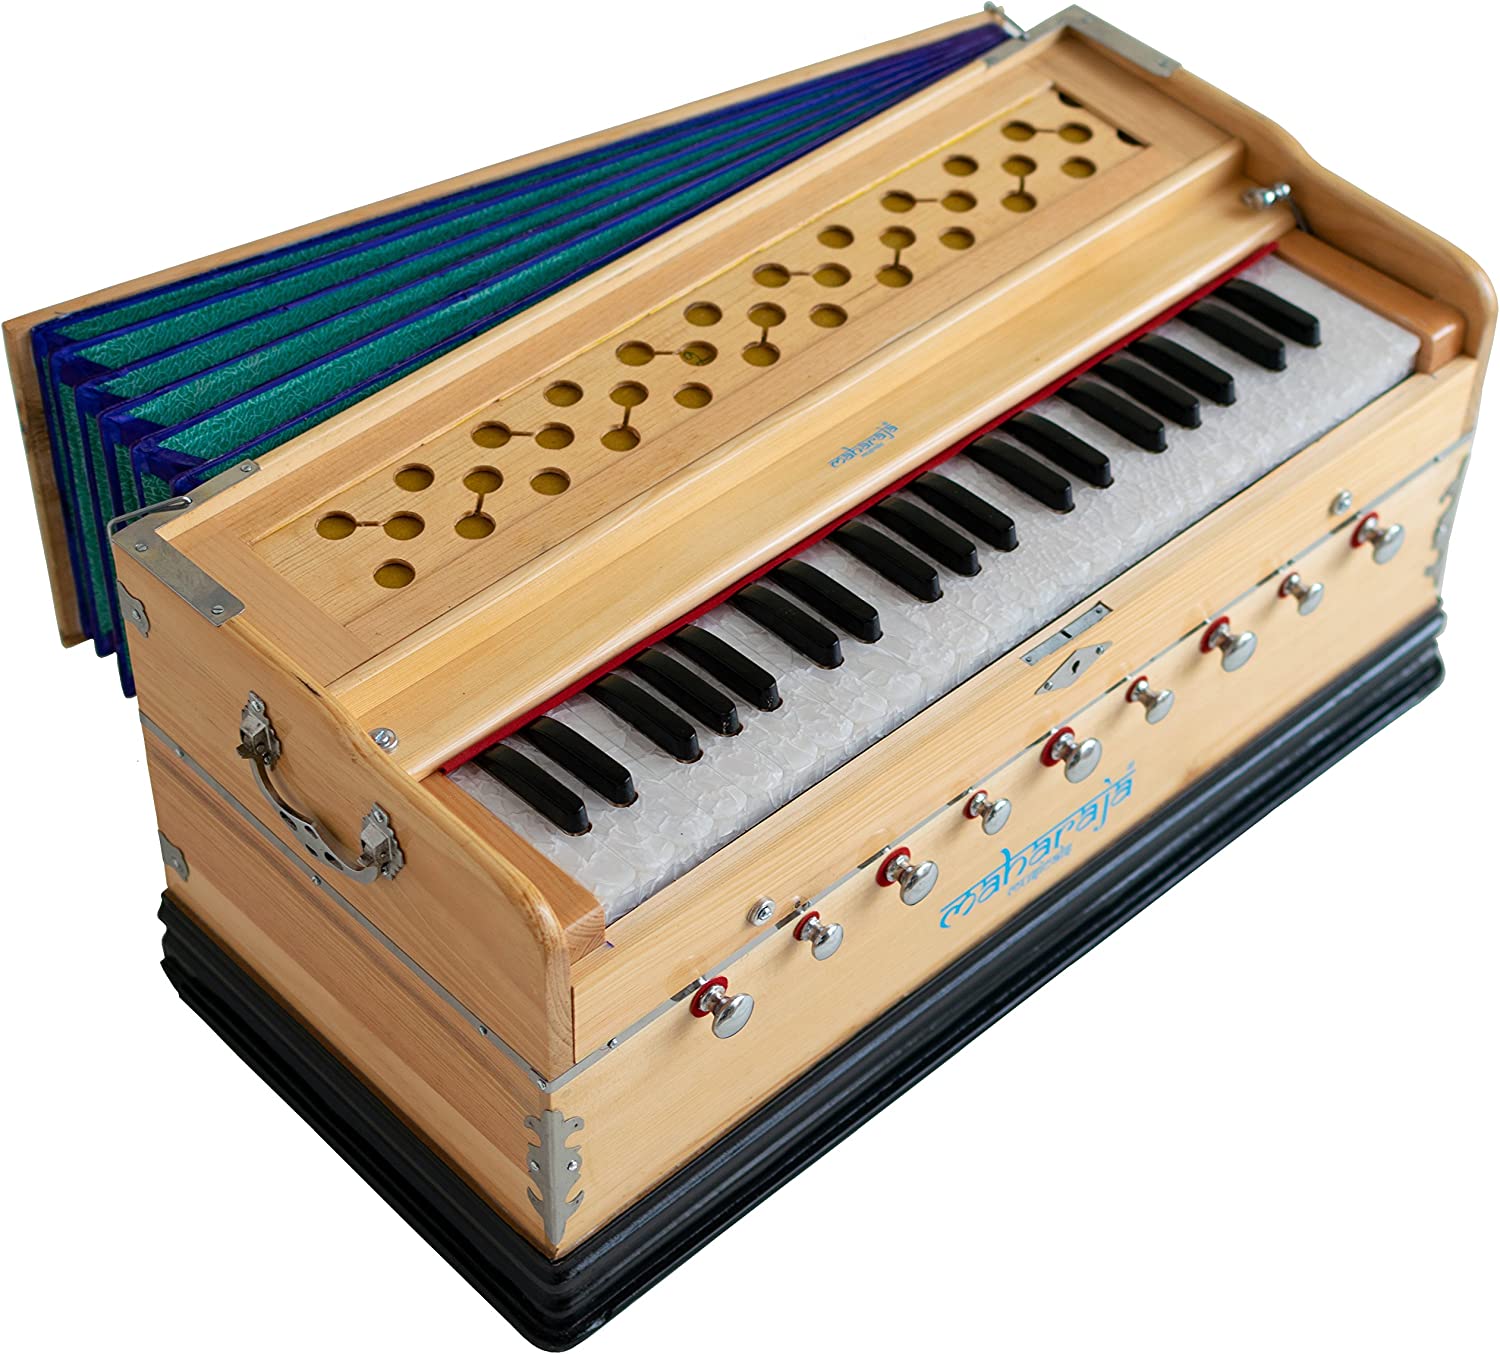 The harmonium, synonymous with Indian music